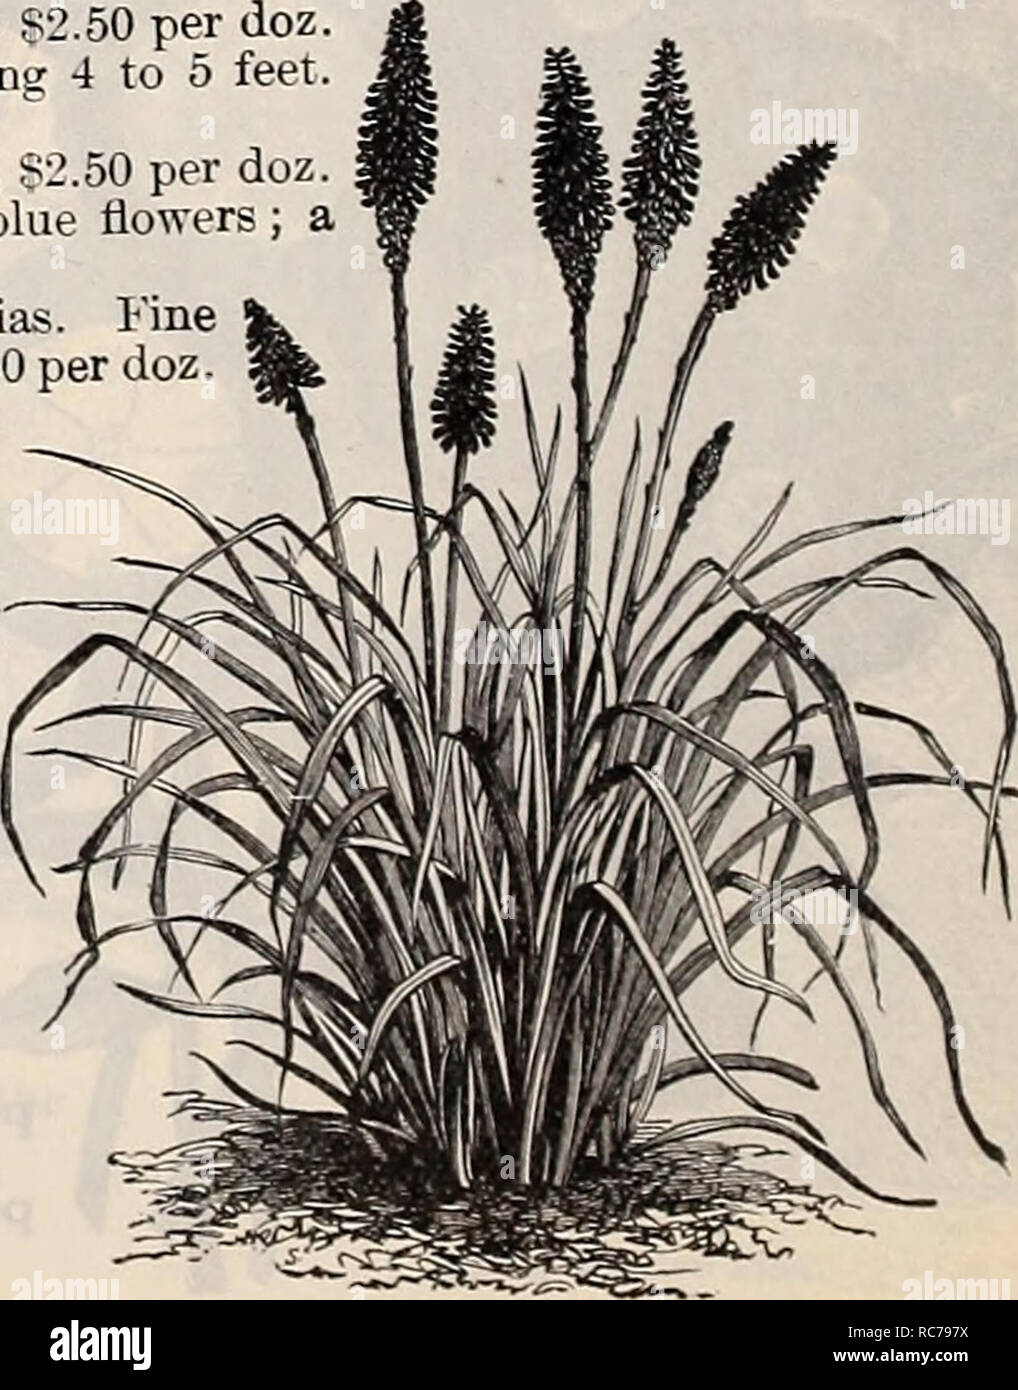 . Dreer's garden calendar : 1897. Seeds Catalogs; Nursery stock Catalogs; Gardening Equipment and supplies Catalogs; Flowers Seeds Catalogs; Vegetables Seeds Catalogs; Fruit Seeds Catalogs. Double Russian Violet. Sedum Fabarium. An upright growing variety 15 to 18 inches high, flowers soft rosy-pink. 15 cts. each, 81 50 per doz. Spirea Filipendula Double. Numerous corymbs of double white flowers, and pretty fern-like foliage. 25 cts. each, 82.50 per doz. Spirea Palmata—(Crimson Meadow Sweet.) One of the most beautiful hardy plants in cultivation. The deep purple red of the stems and branches,  Stock Photo